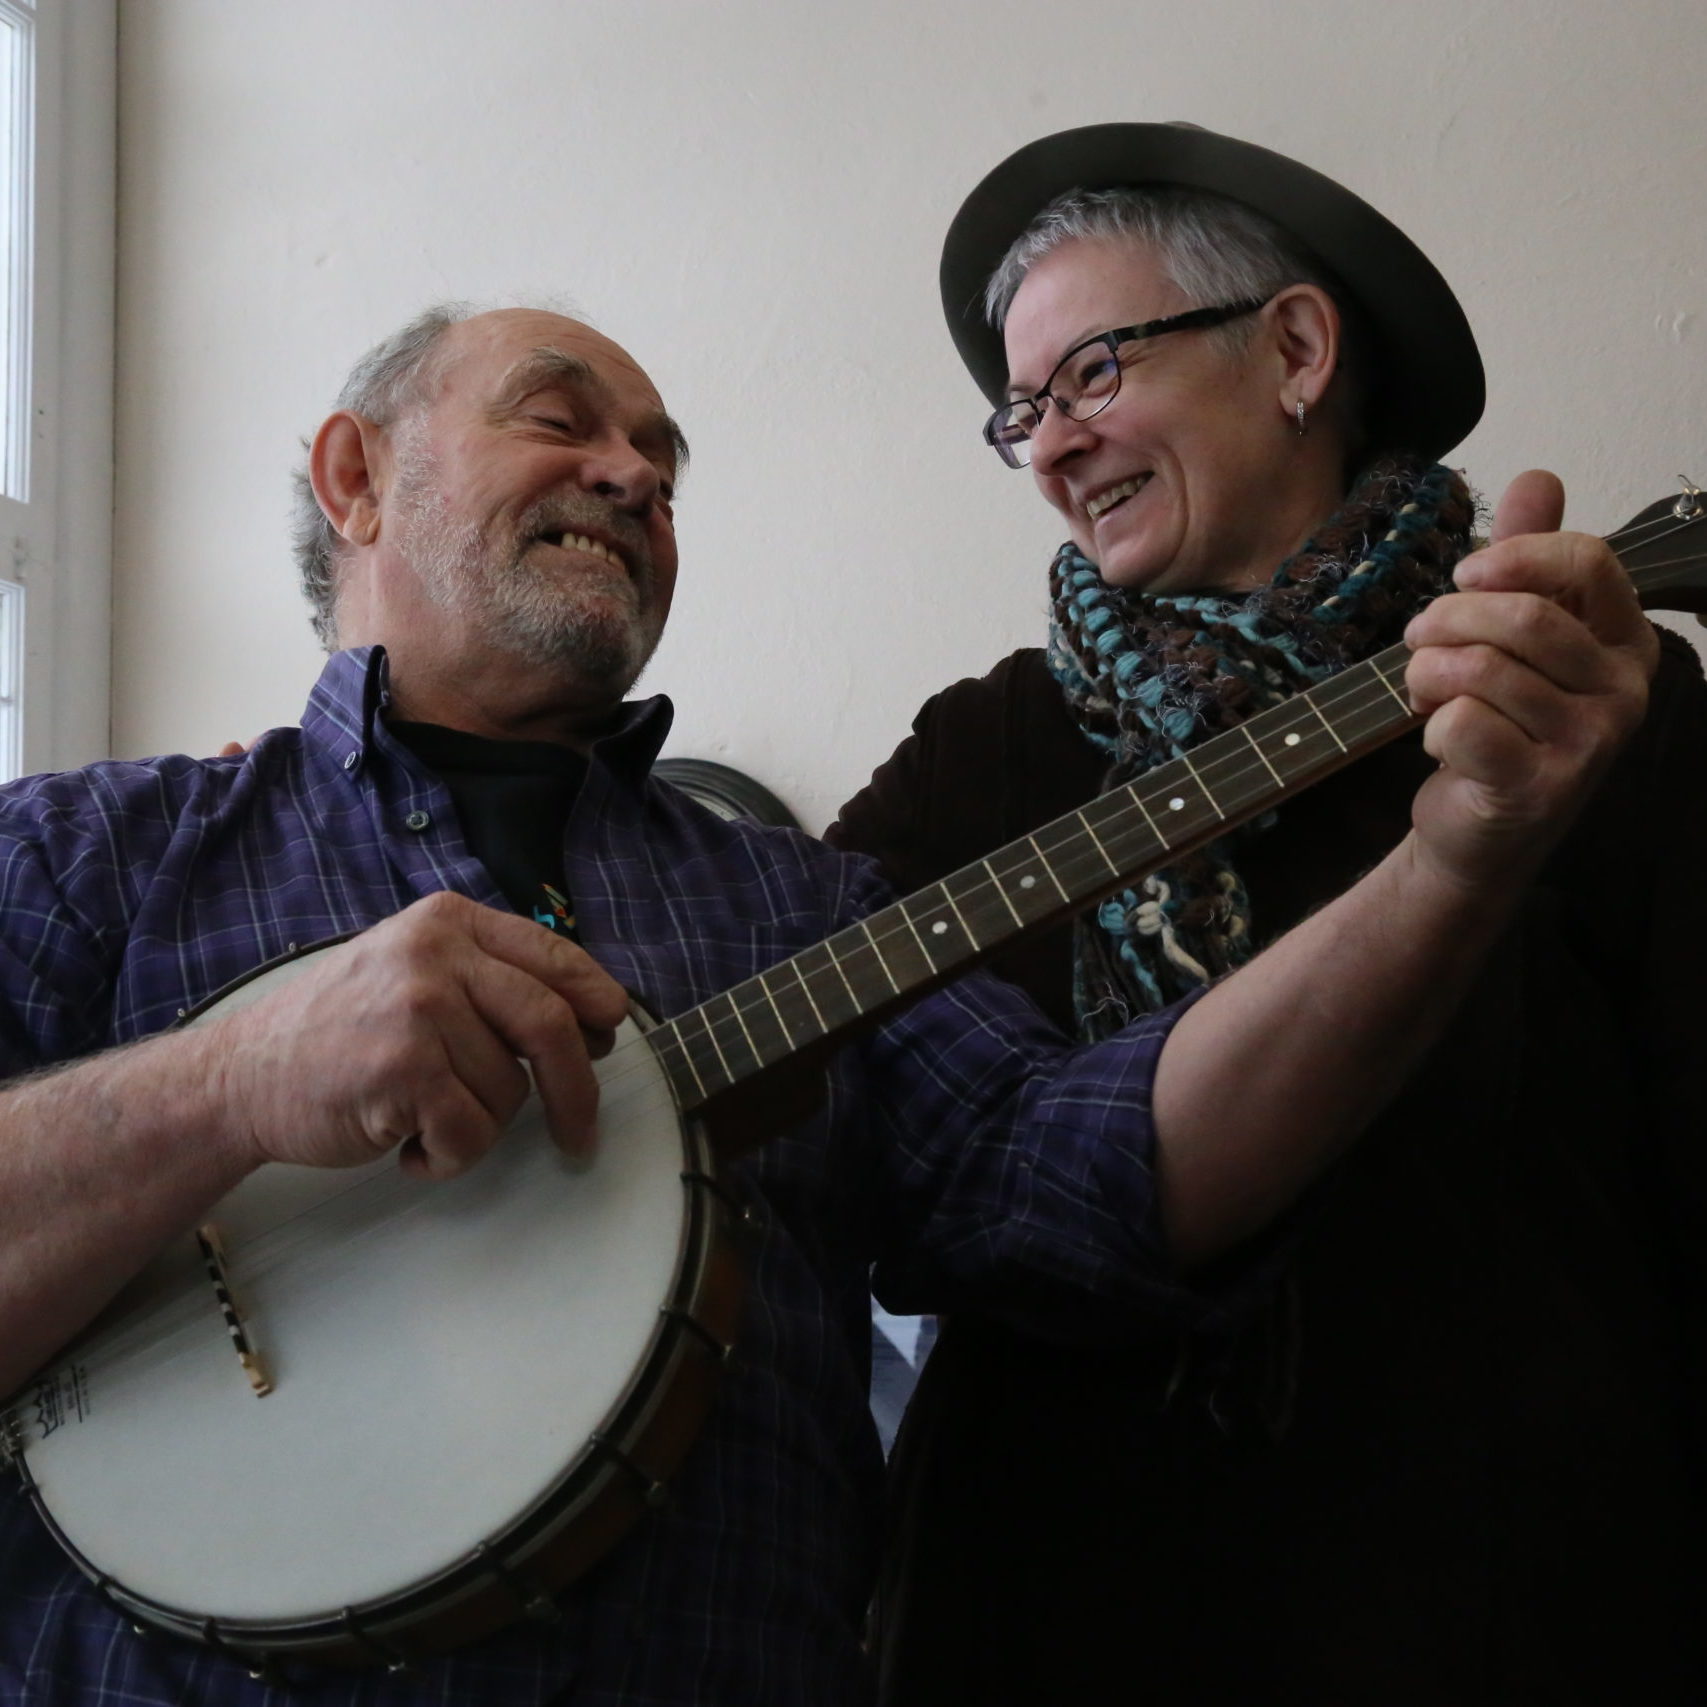 Two people jamming with a banjo